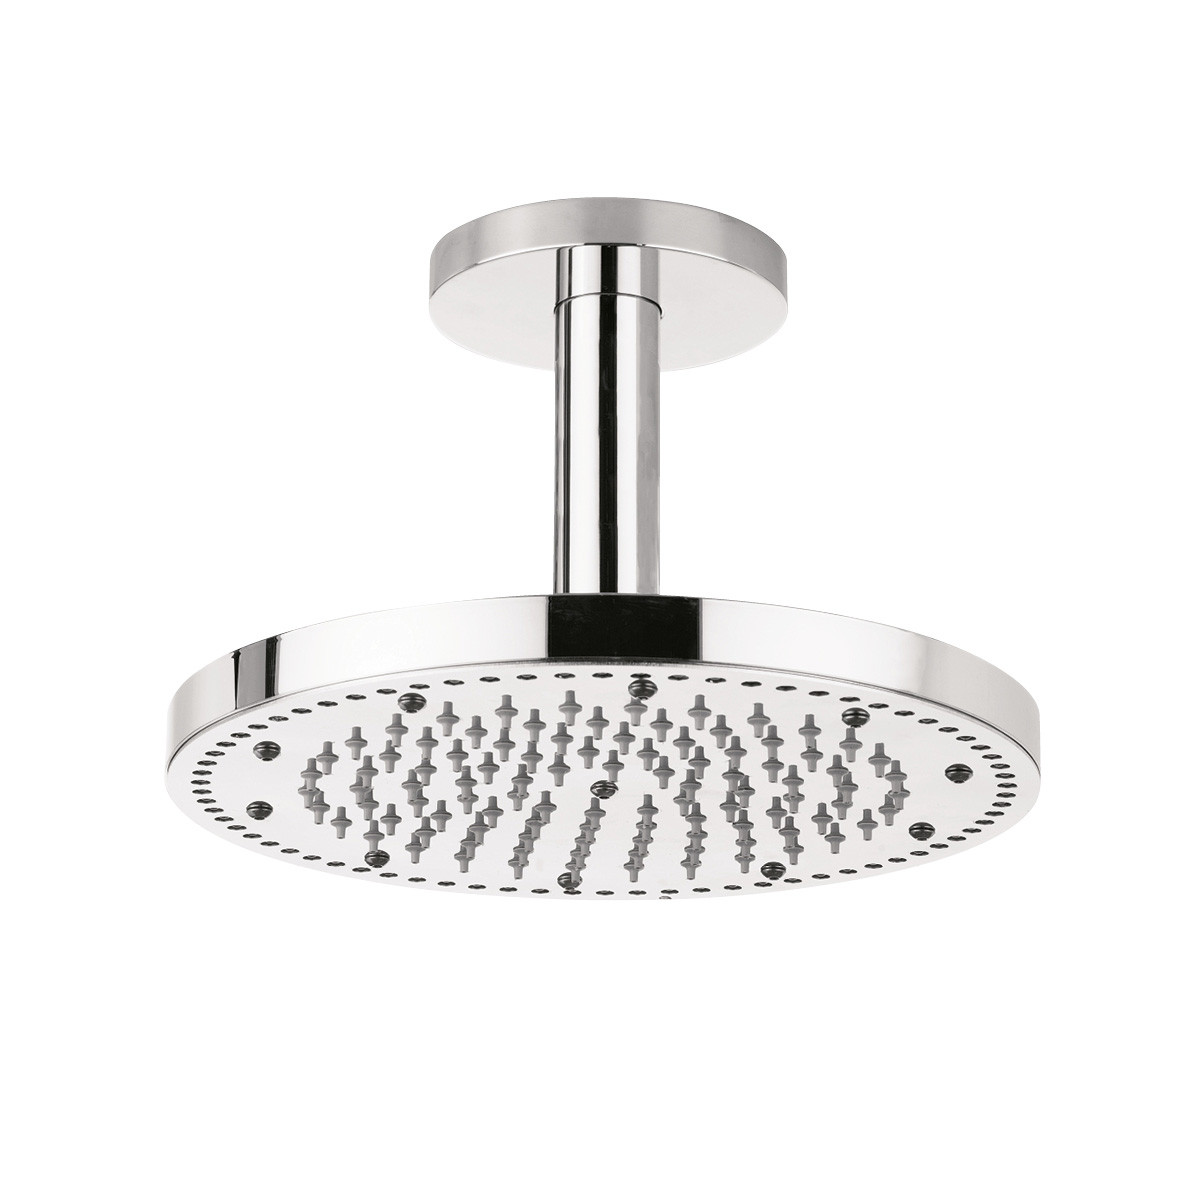 Aquatica WCRD-240 Sparkle Ceiling Mounted Shower Head With Remote Control In Chrome